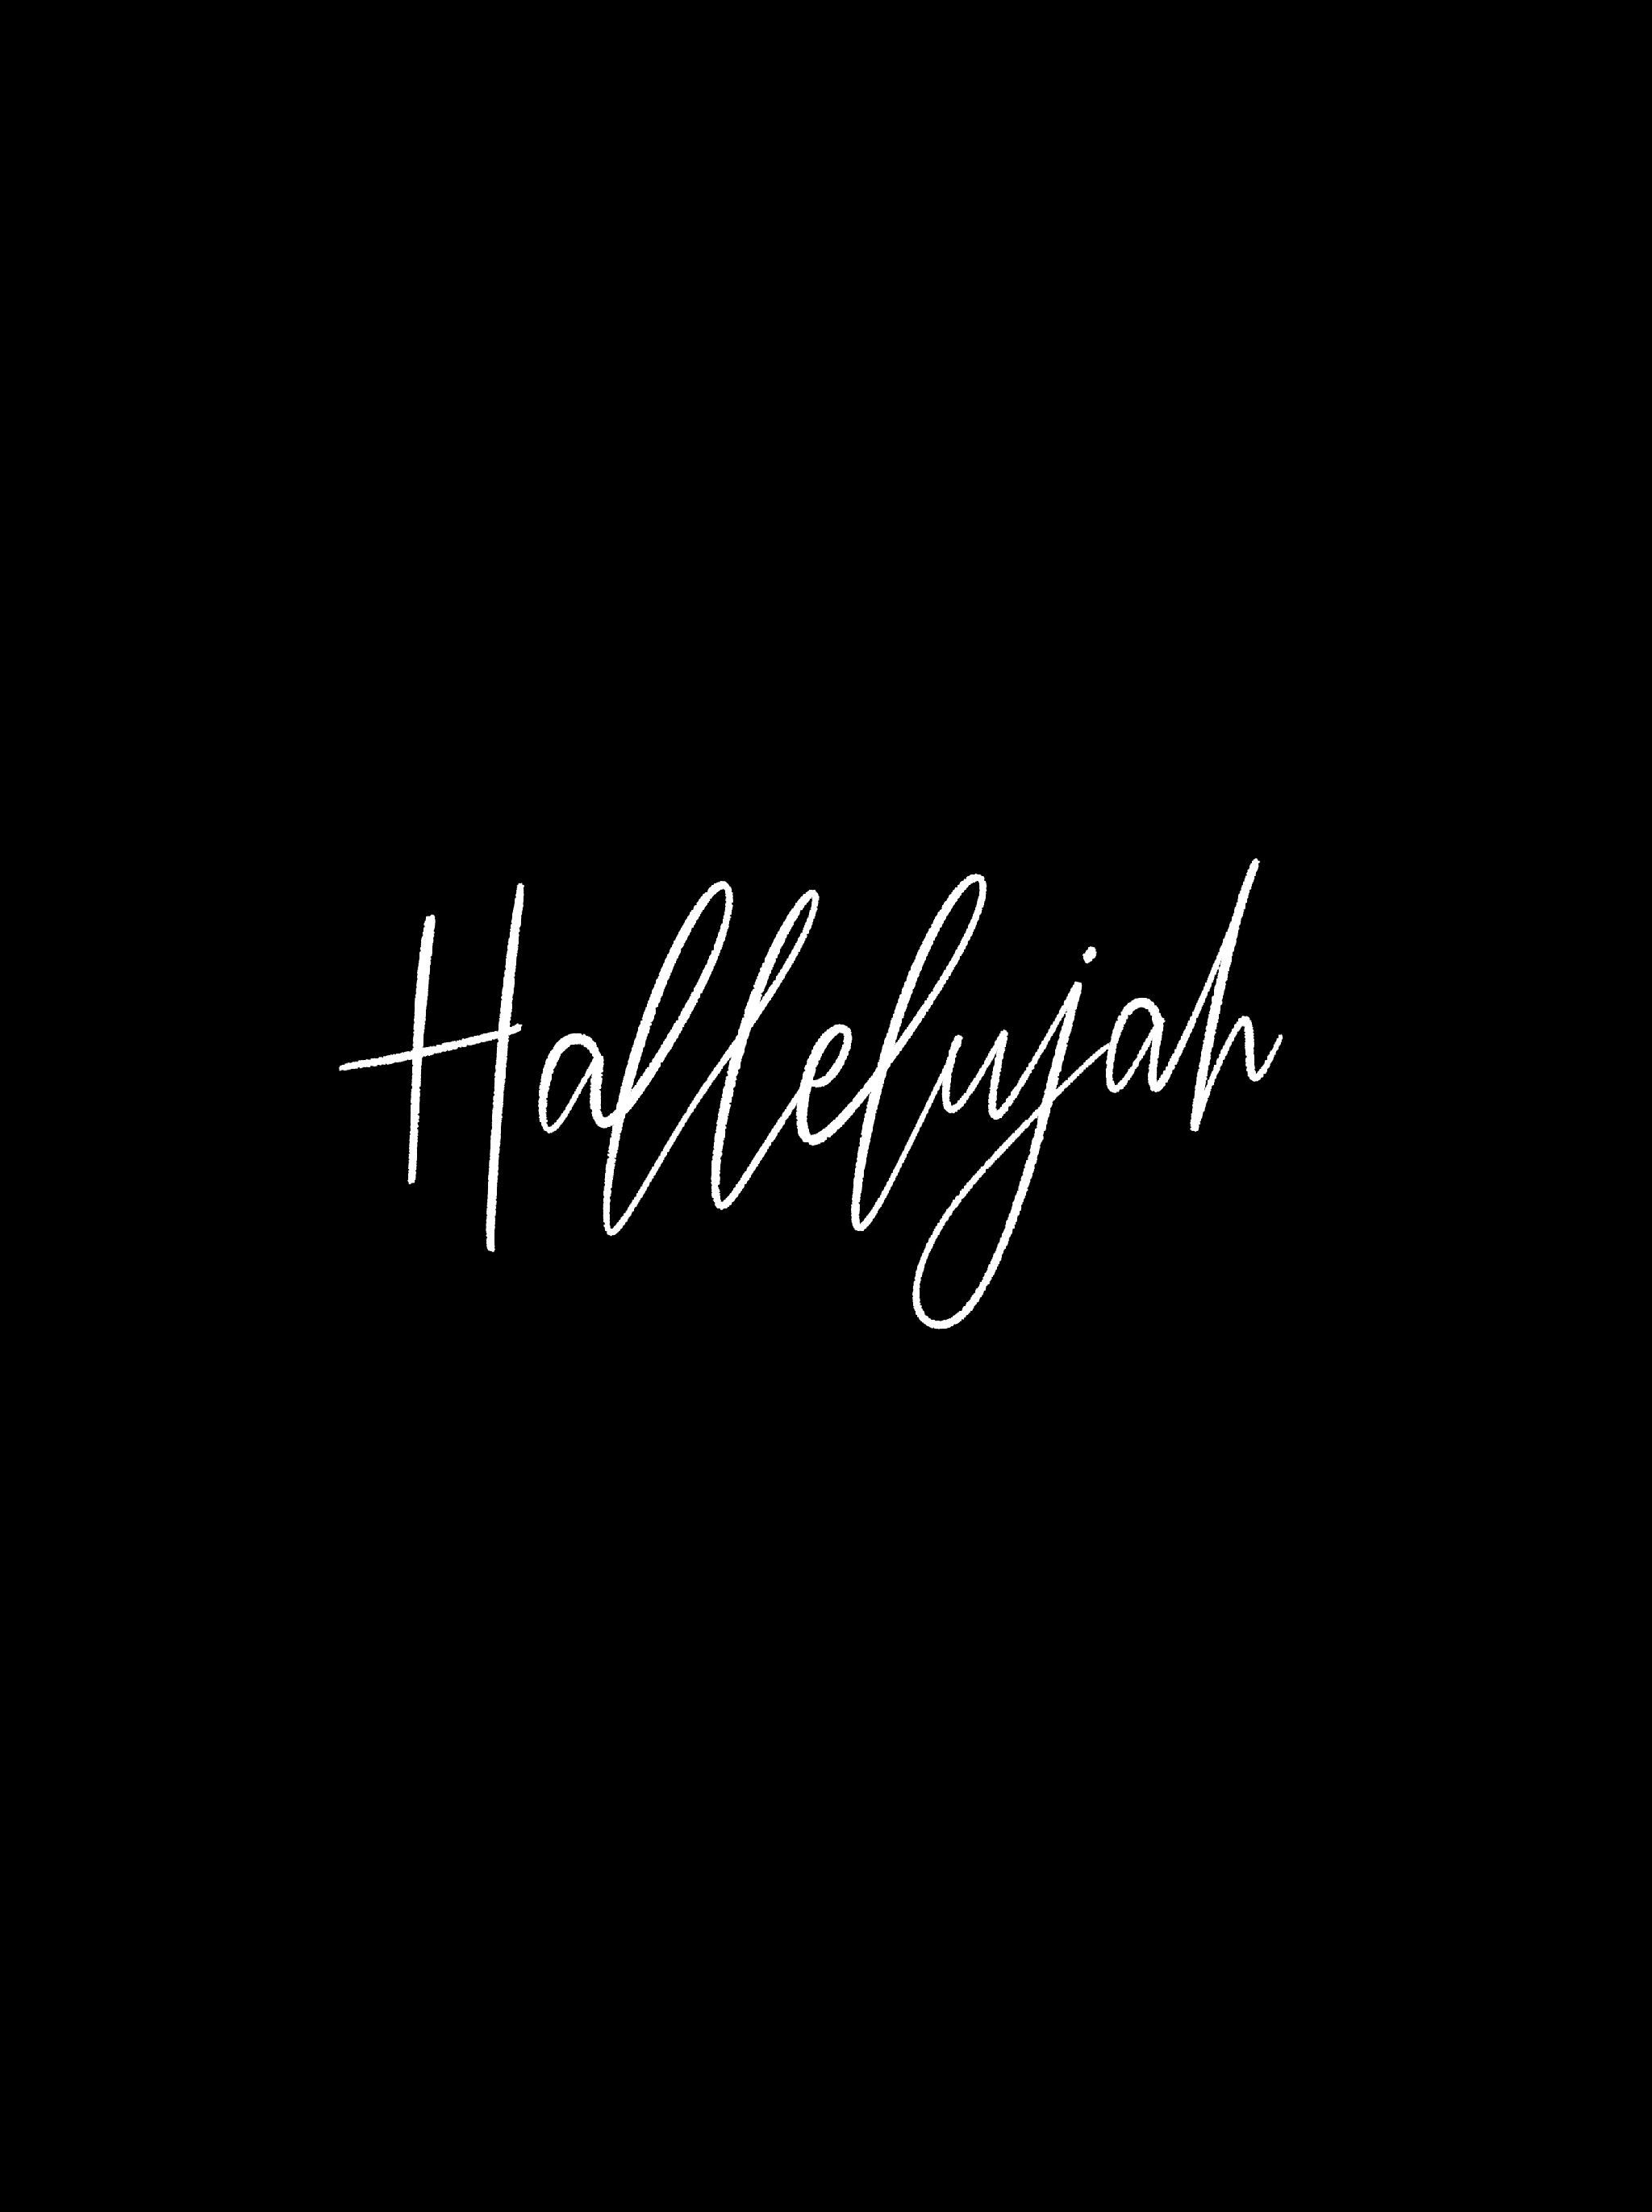 Hallelujah calligraphy, caligrafia, wallpaper, papel de parede, procreate lettering, ipad lettering. Quotes about god, Bible quotes, Faith quotes